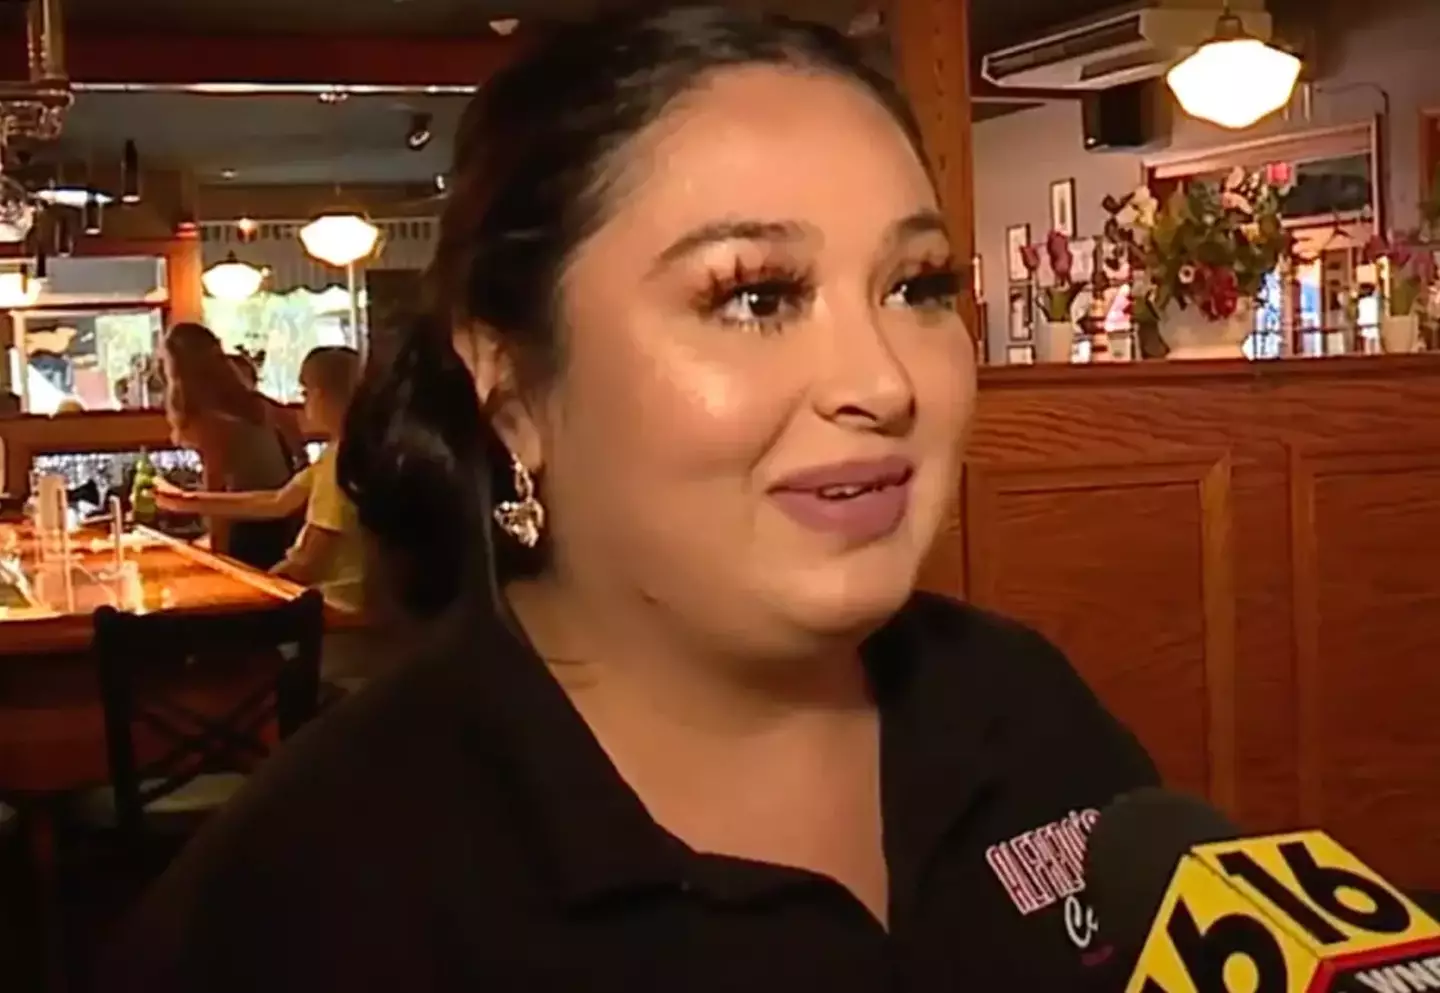 A $3,000 tip left for a waitress in Scranton, Pennsylvania, became a total pain in the backside for staff at Alfredo's Cafe.